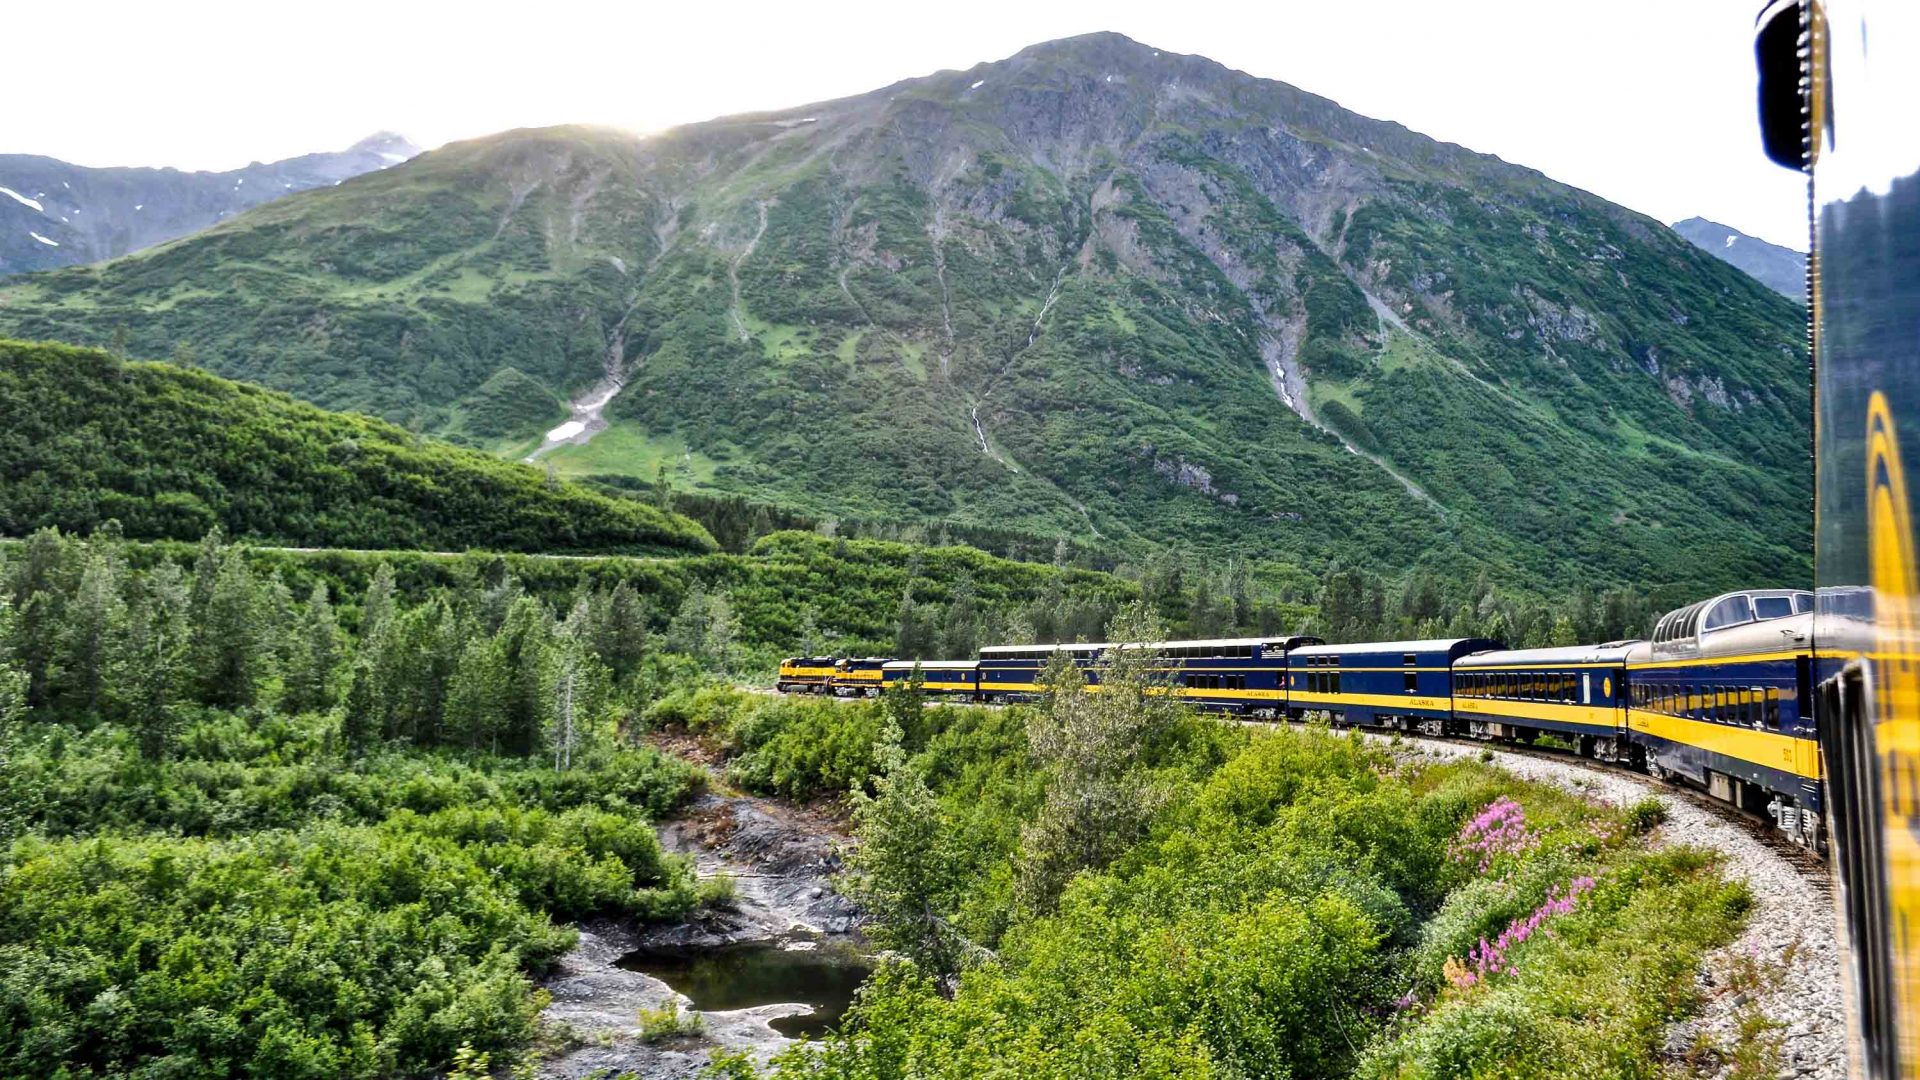 In Alaska, the railroad leads to nowhere, and that’s absolutely fine